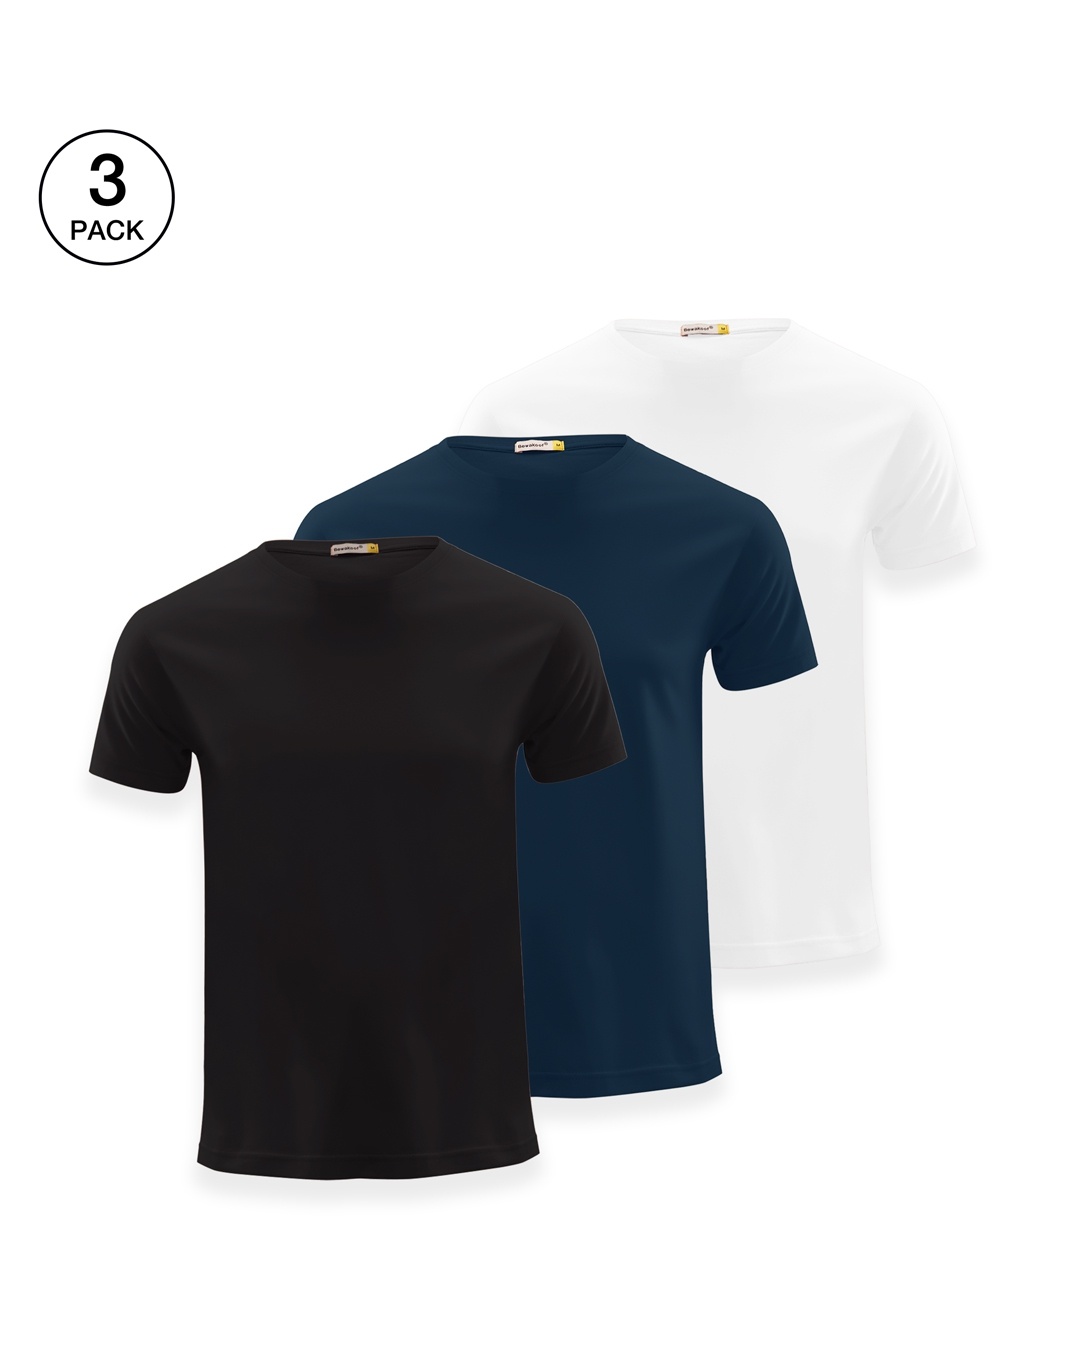 Shop Men's Black,Blue and White T-shirt Pack of 3-Front